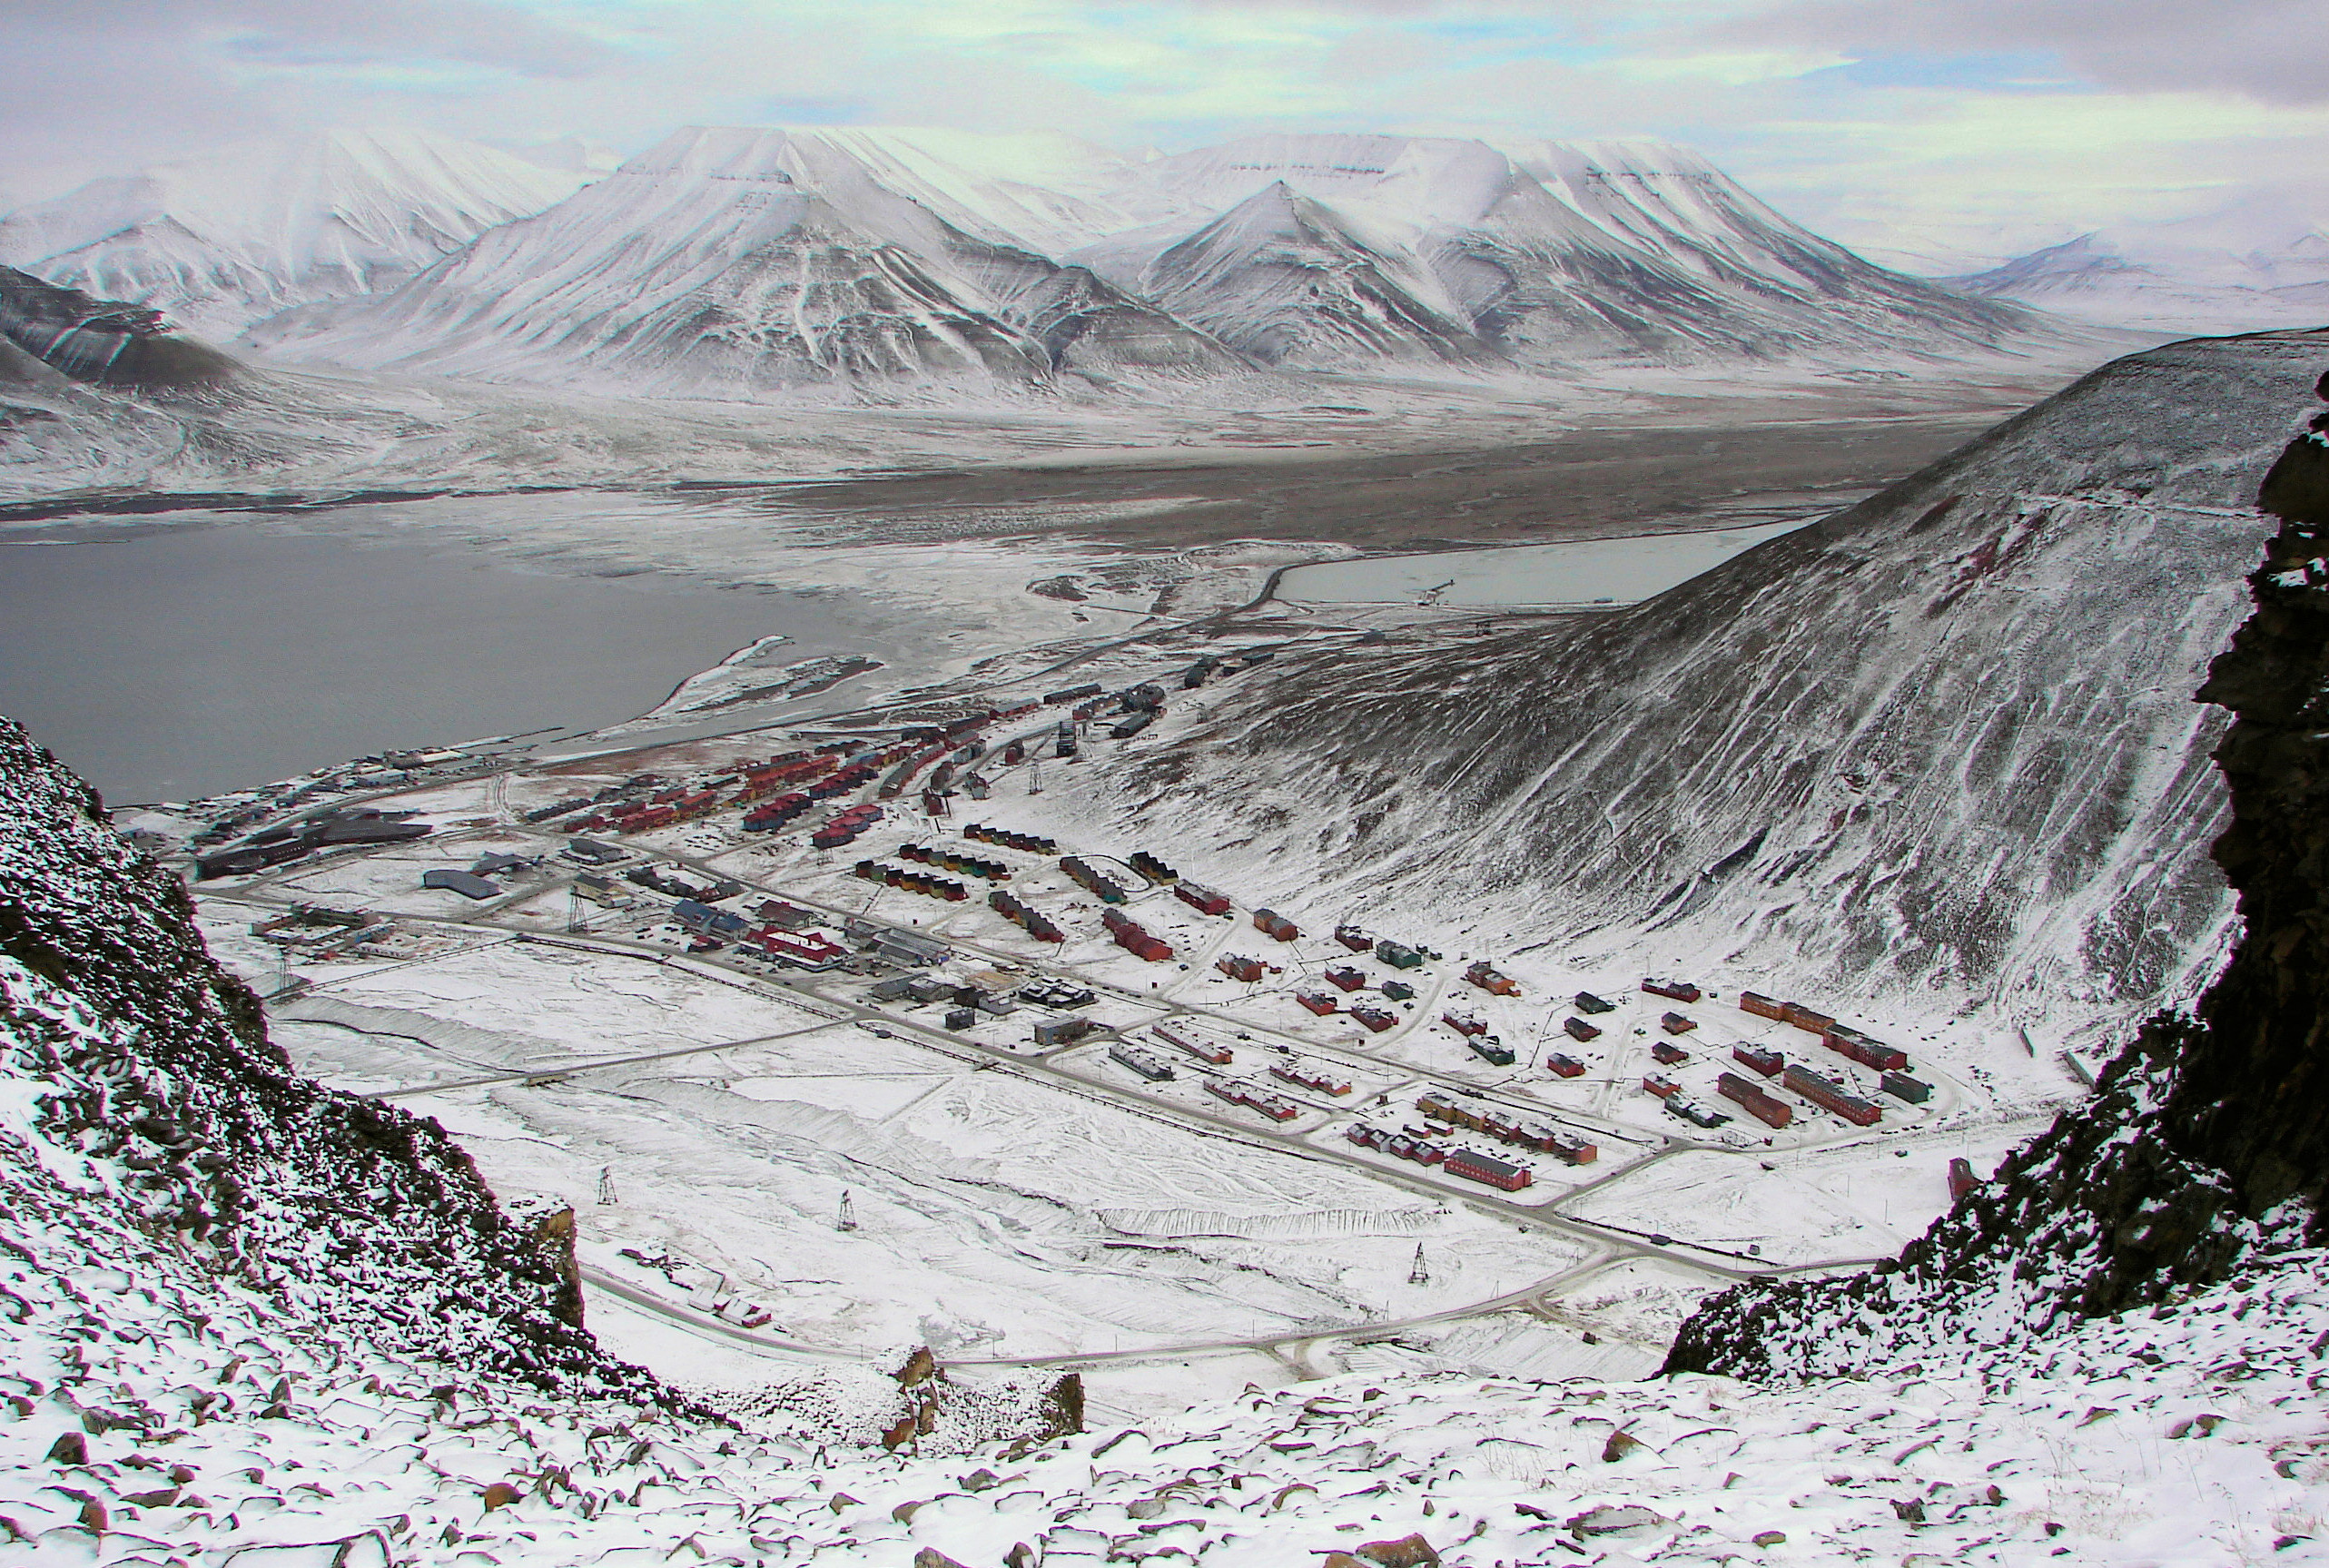 The final destination, Longyearbyen, Svalbard. A lot of people have simply asked Why!?